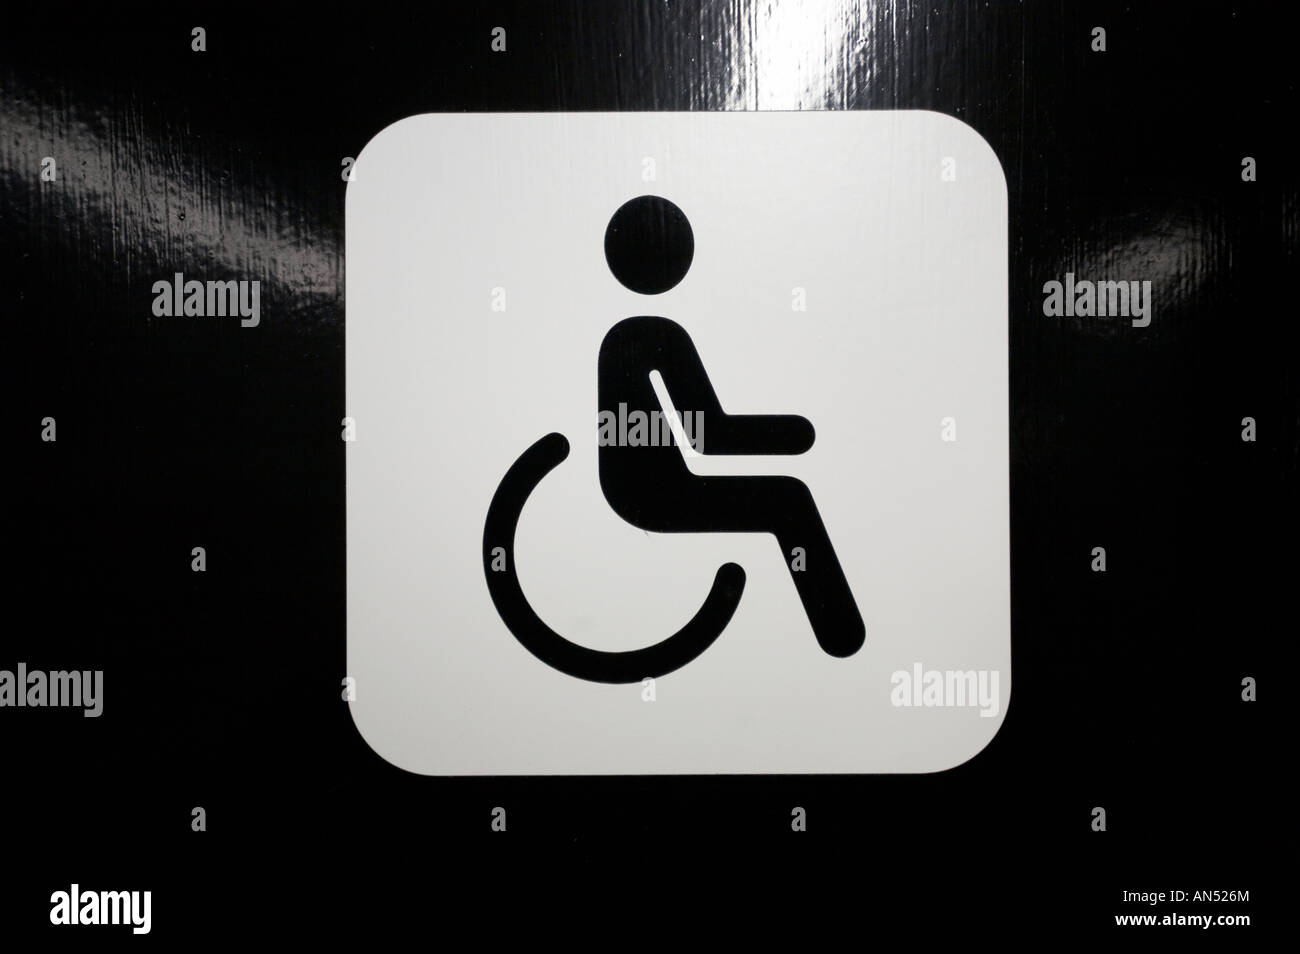 disabled wheel chair wheelchair special needs disability access bathroom toilet door Stock Photo